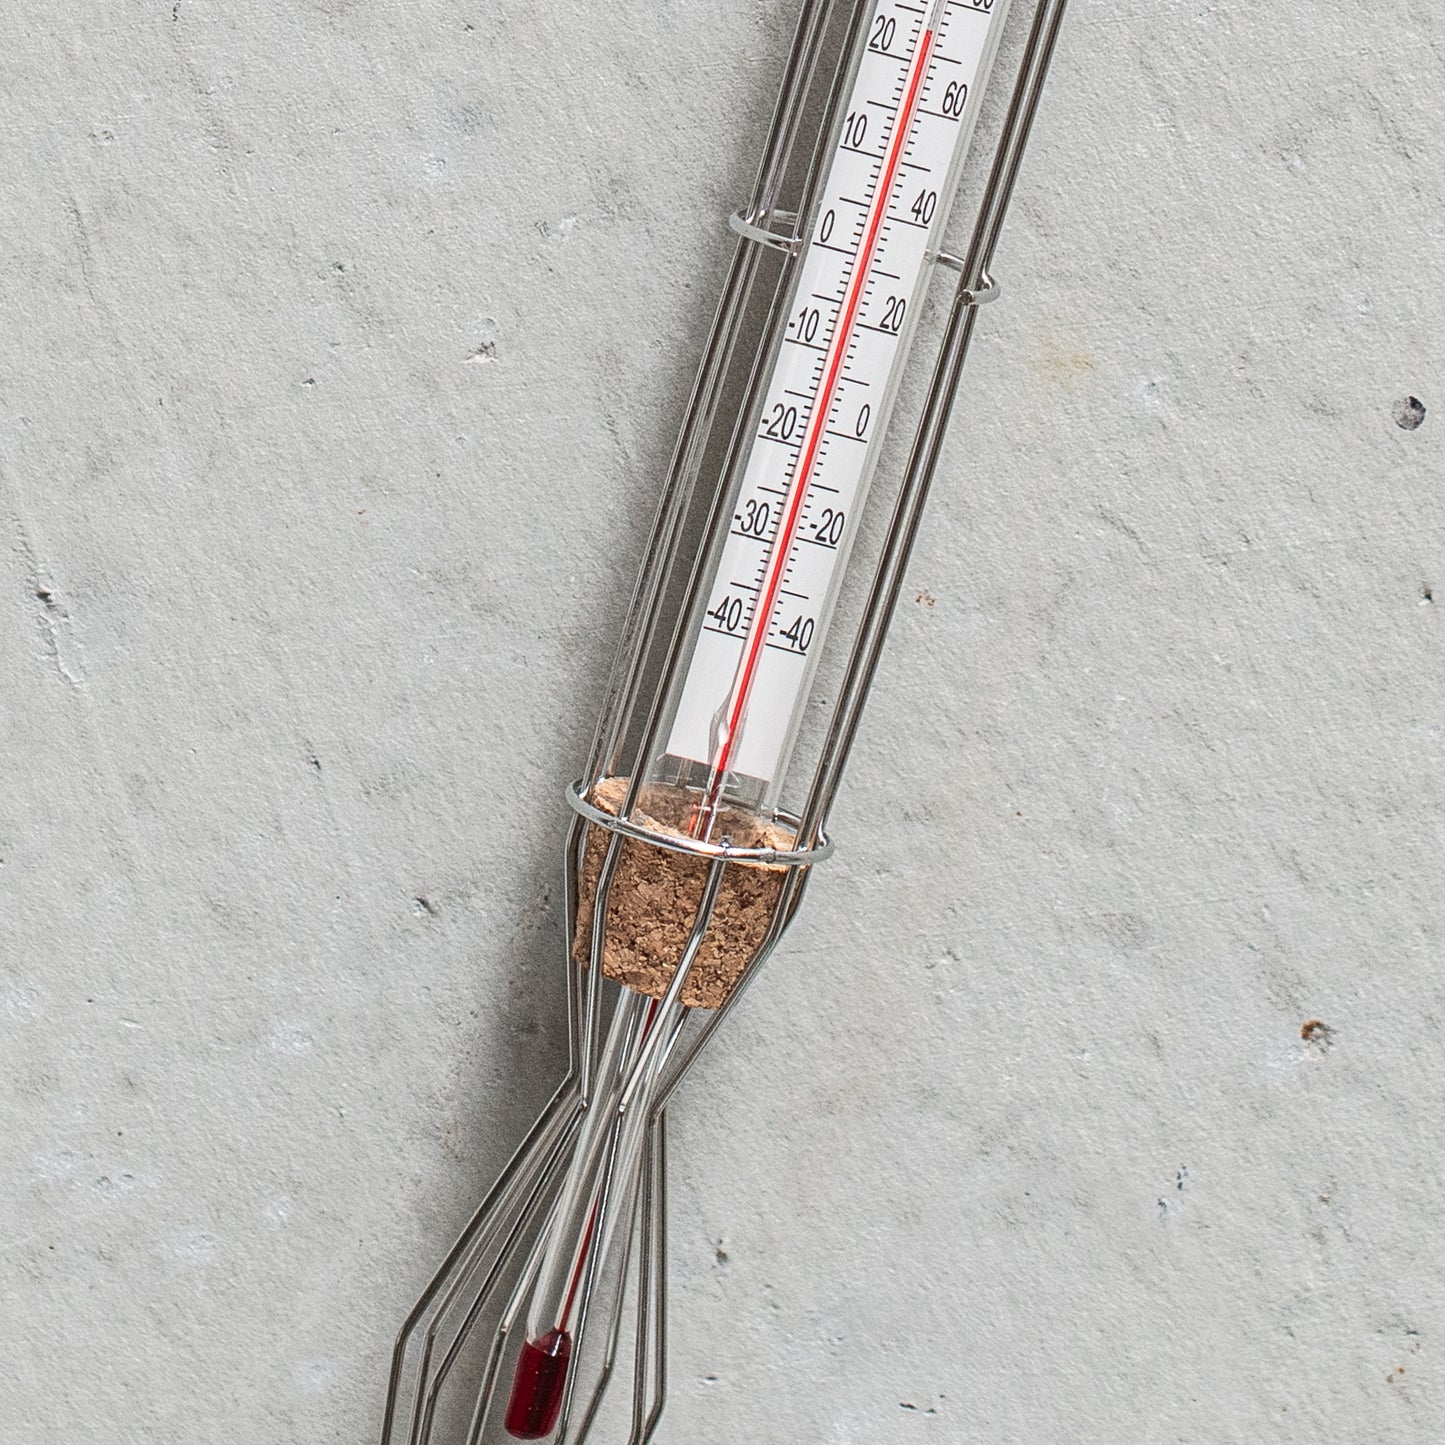 weather thermometer